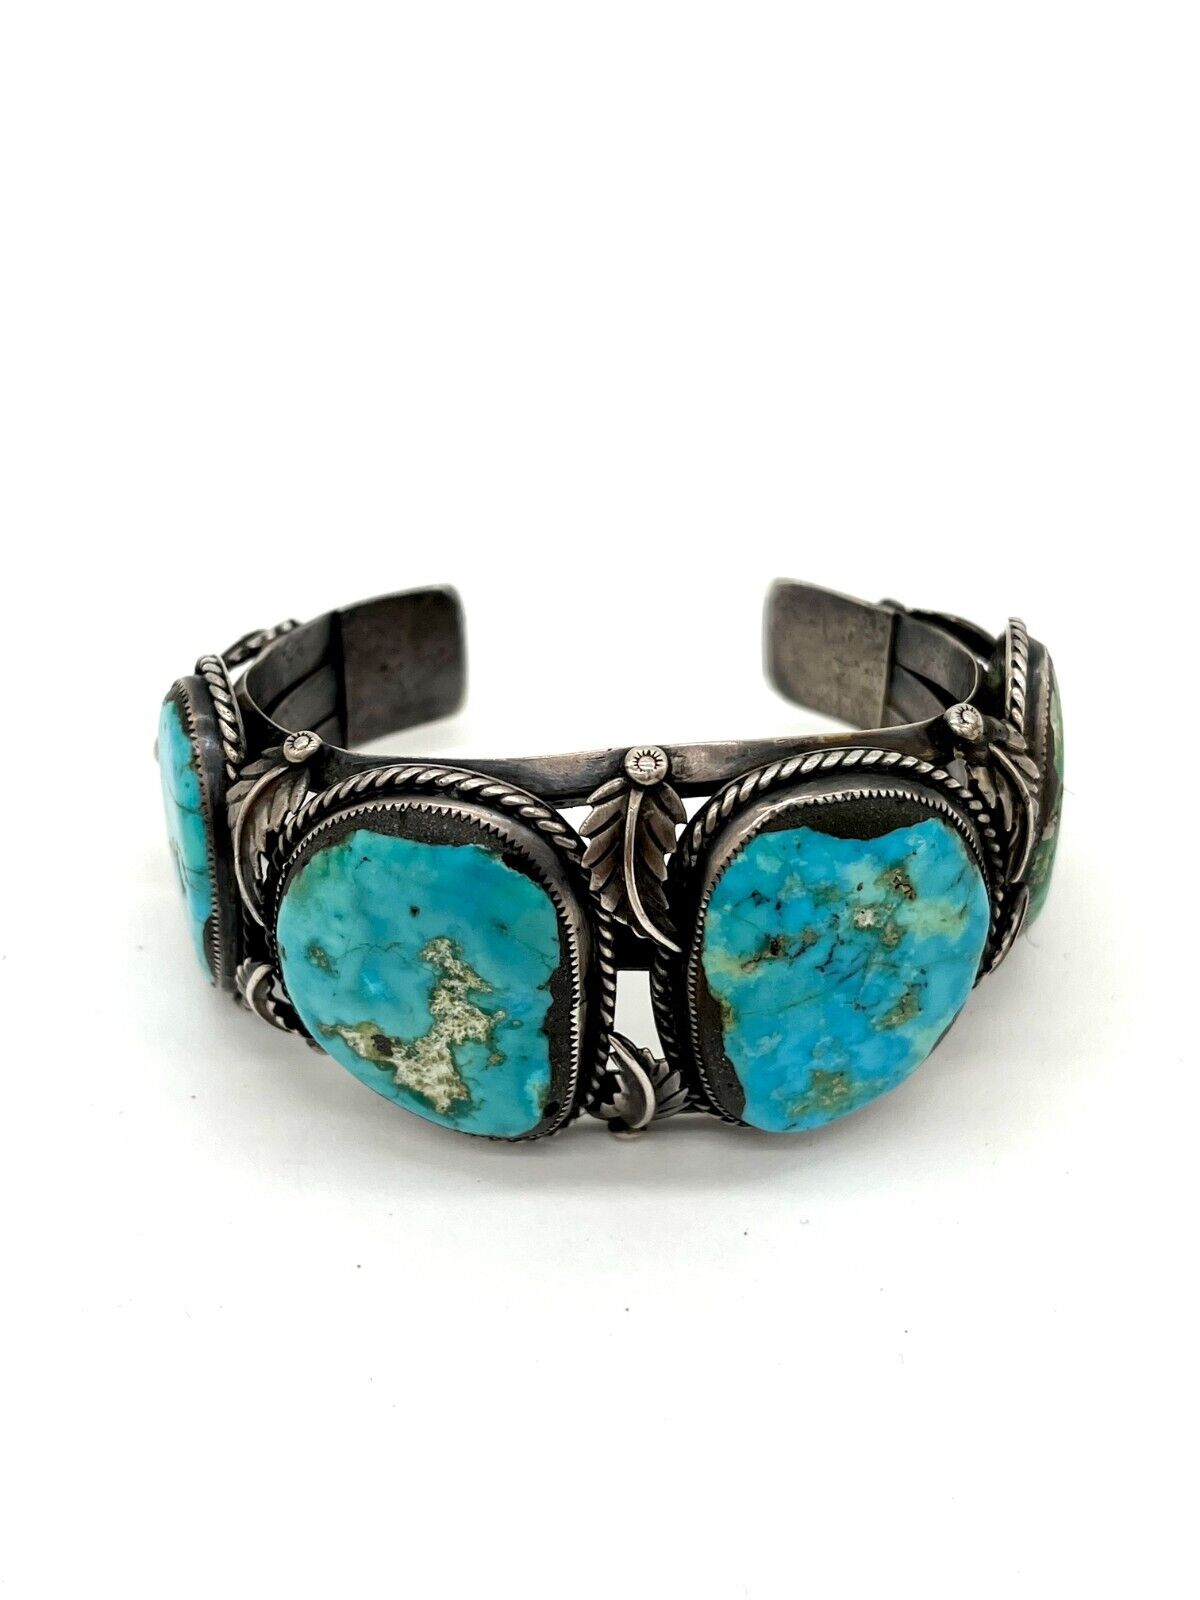 Vintage Native American Silver Cuff - Four Turquoise Stones - Signed